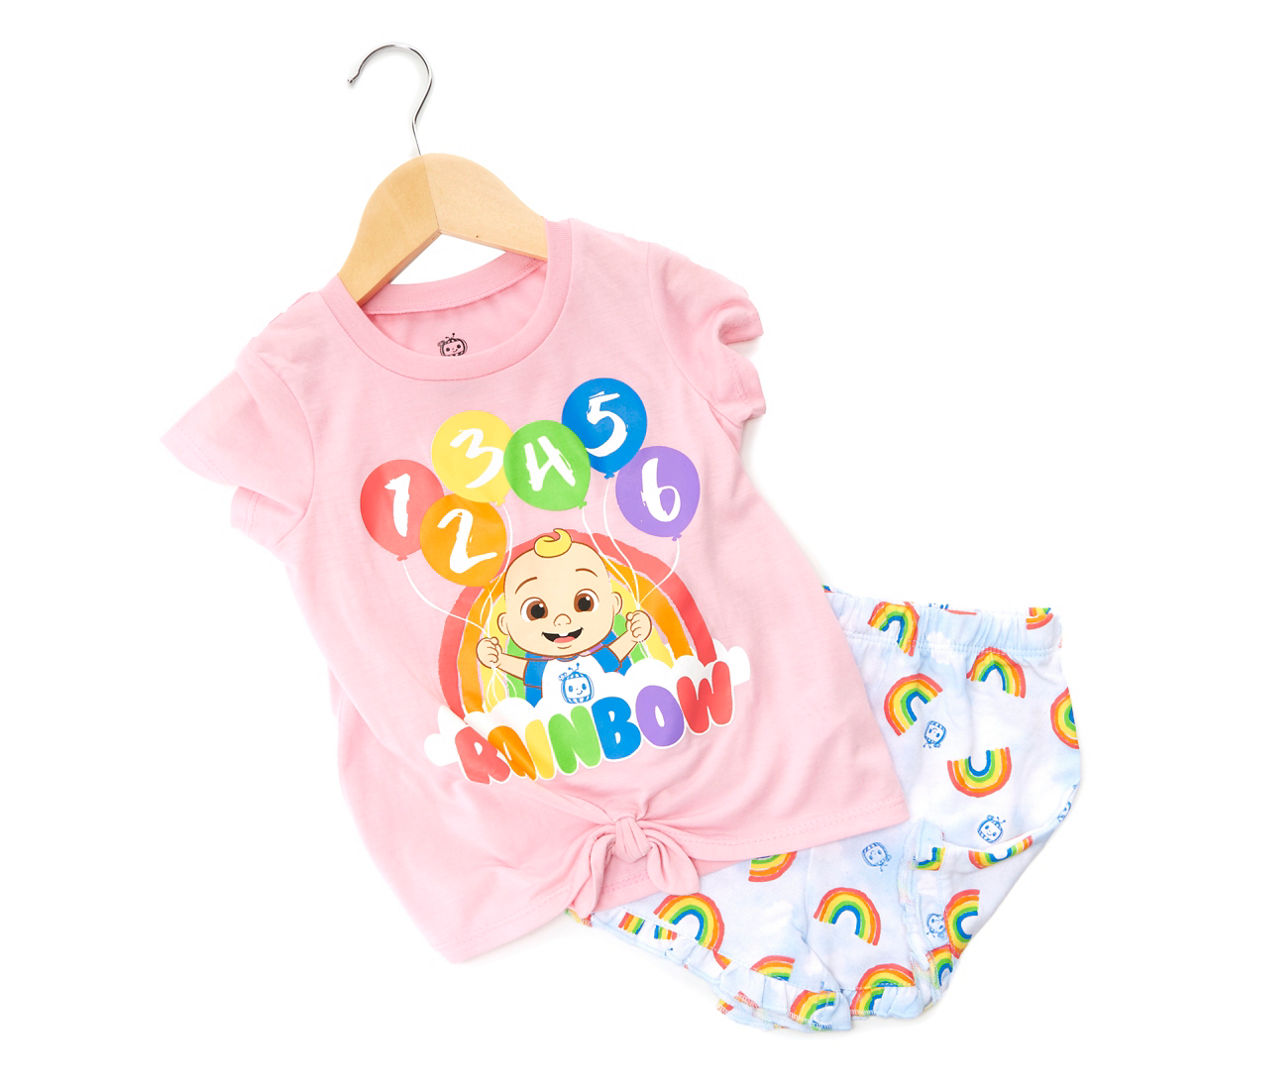 Baby Size 18M CoComelon "Rainbow" Pink Tee & Blue Cloud Shorts